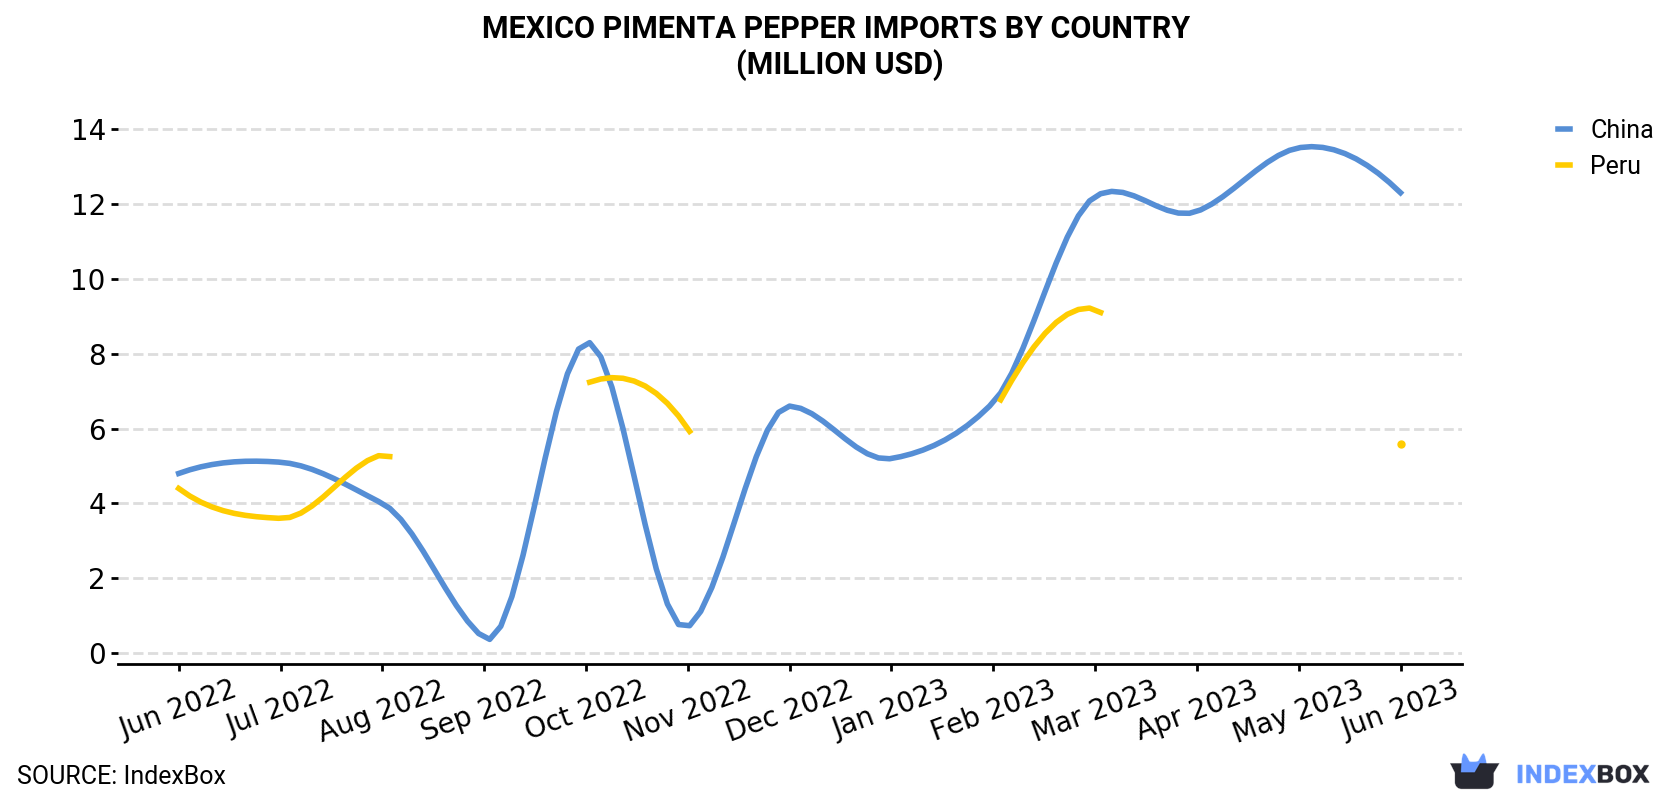 Mexico Pimenta Pepper Imports By Country (Million USD)